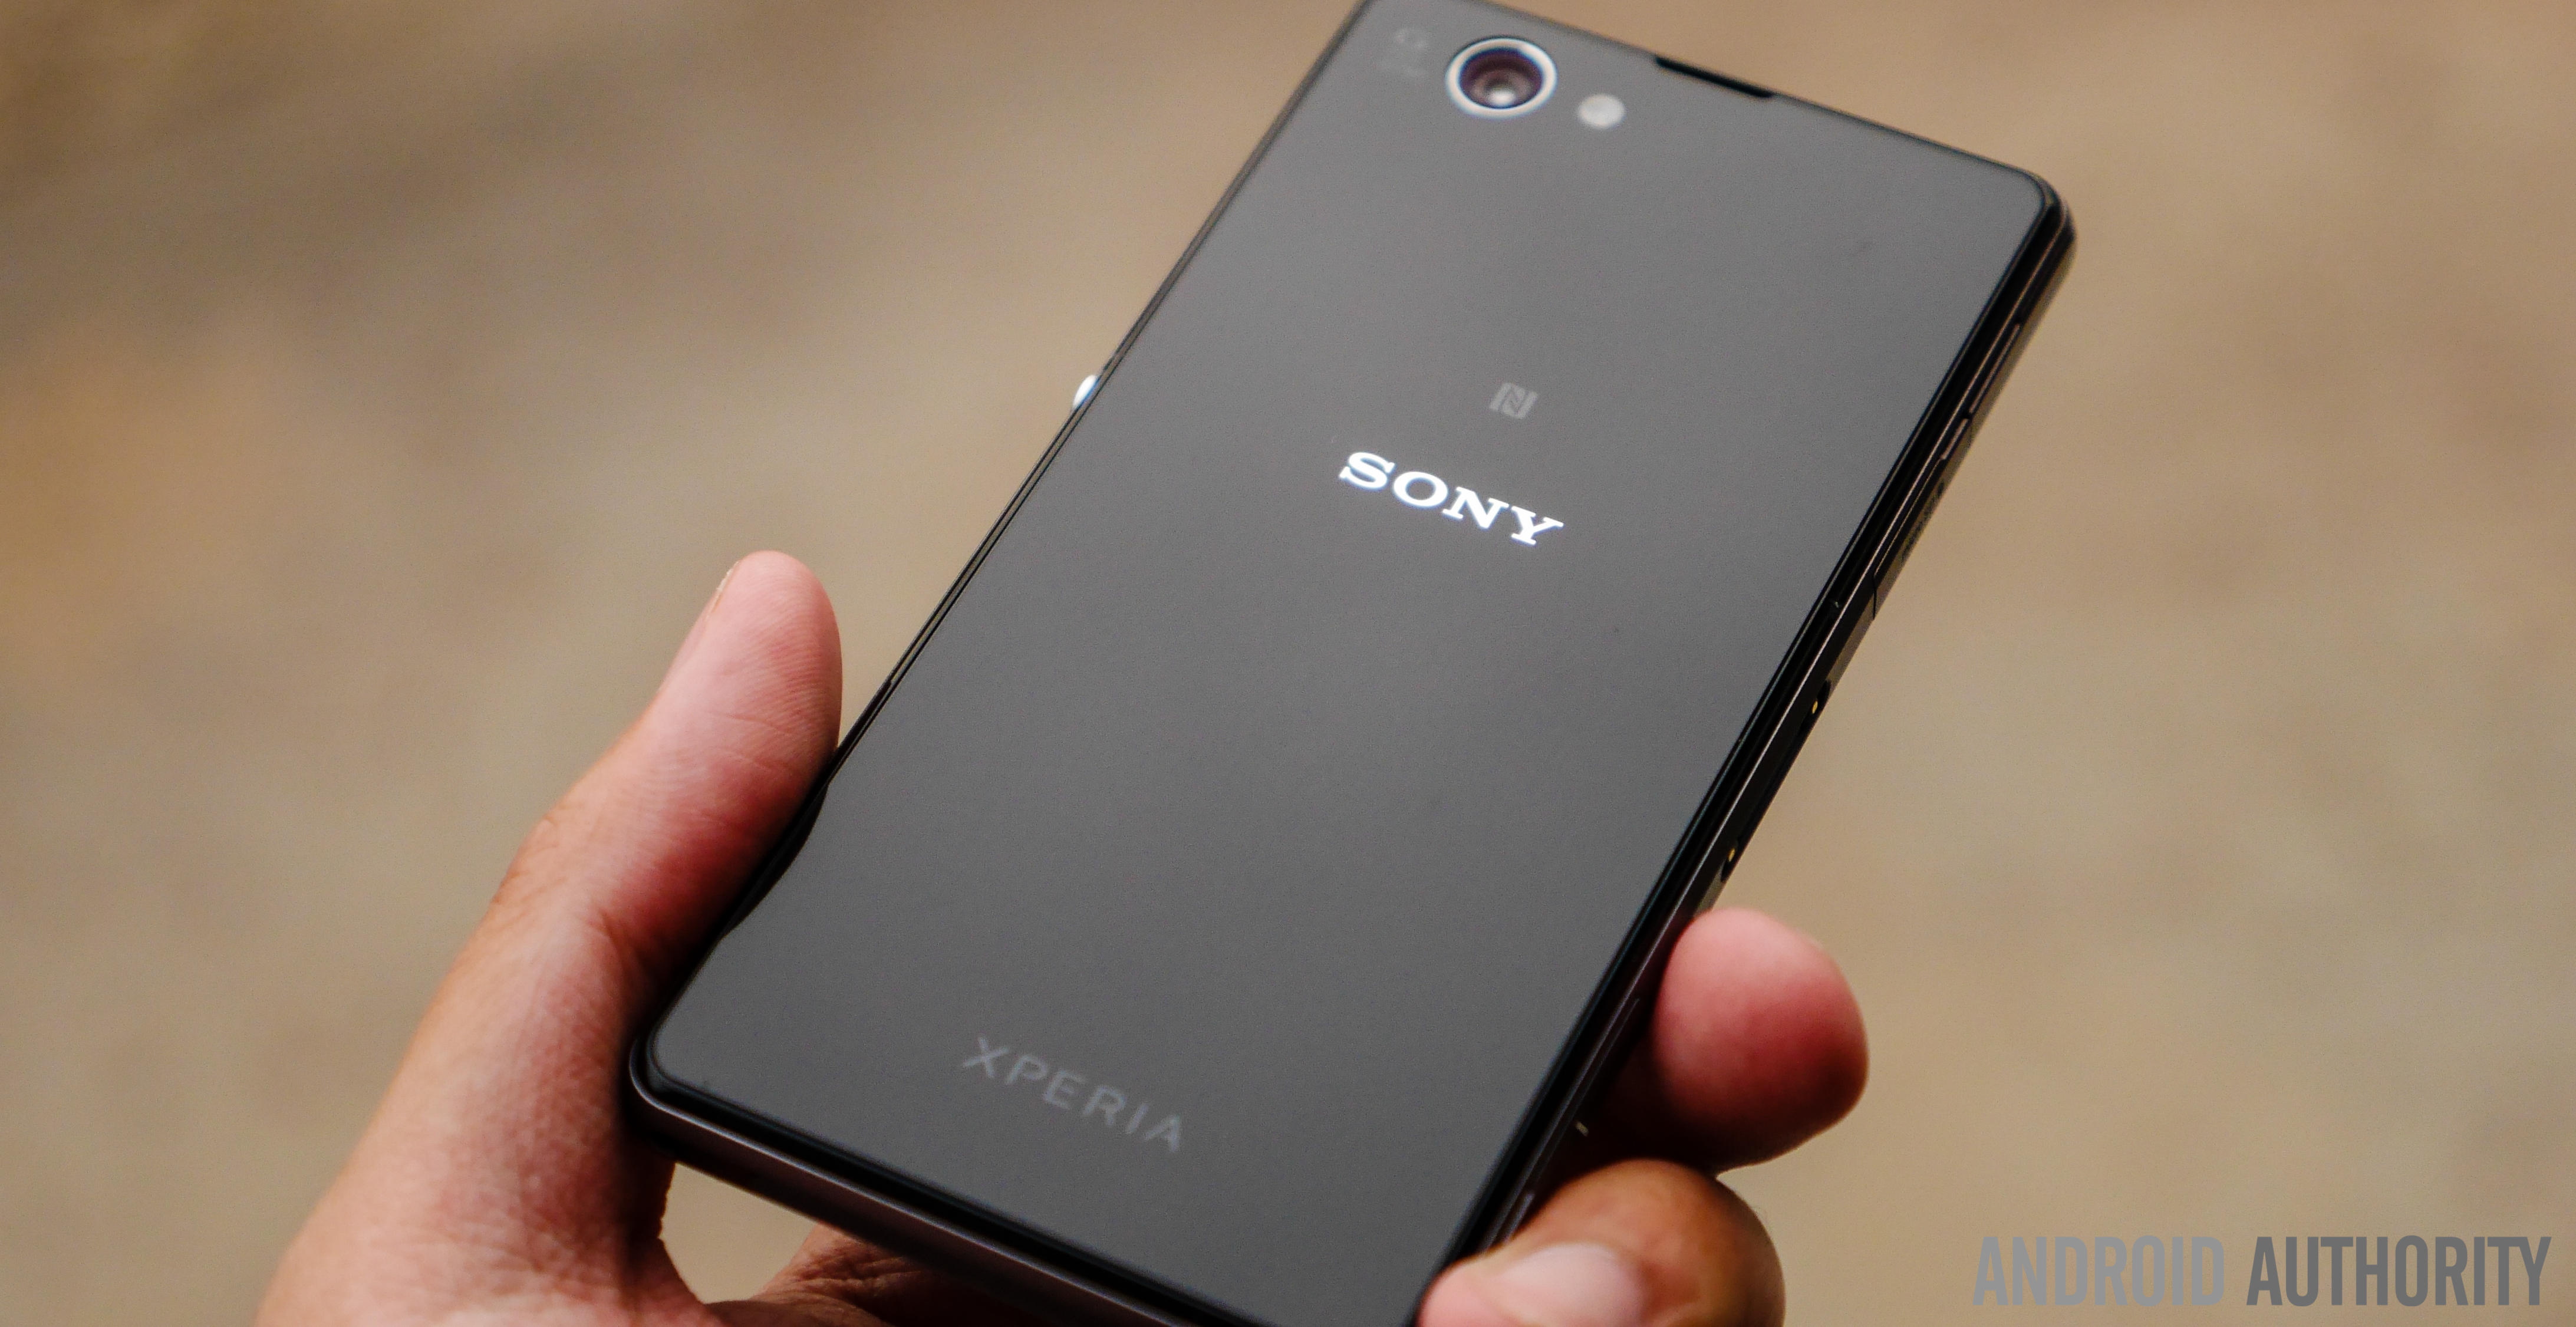 Evaluatie veiling groentje Sony Xperia Z3 Compact specs and image leaked